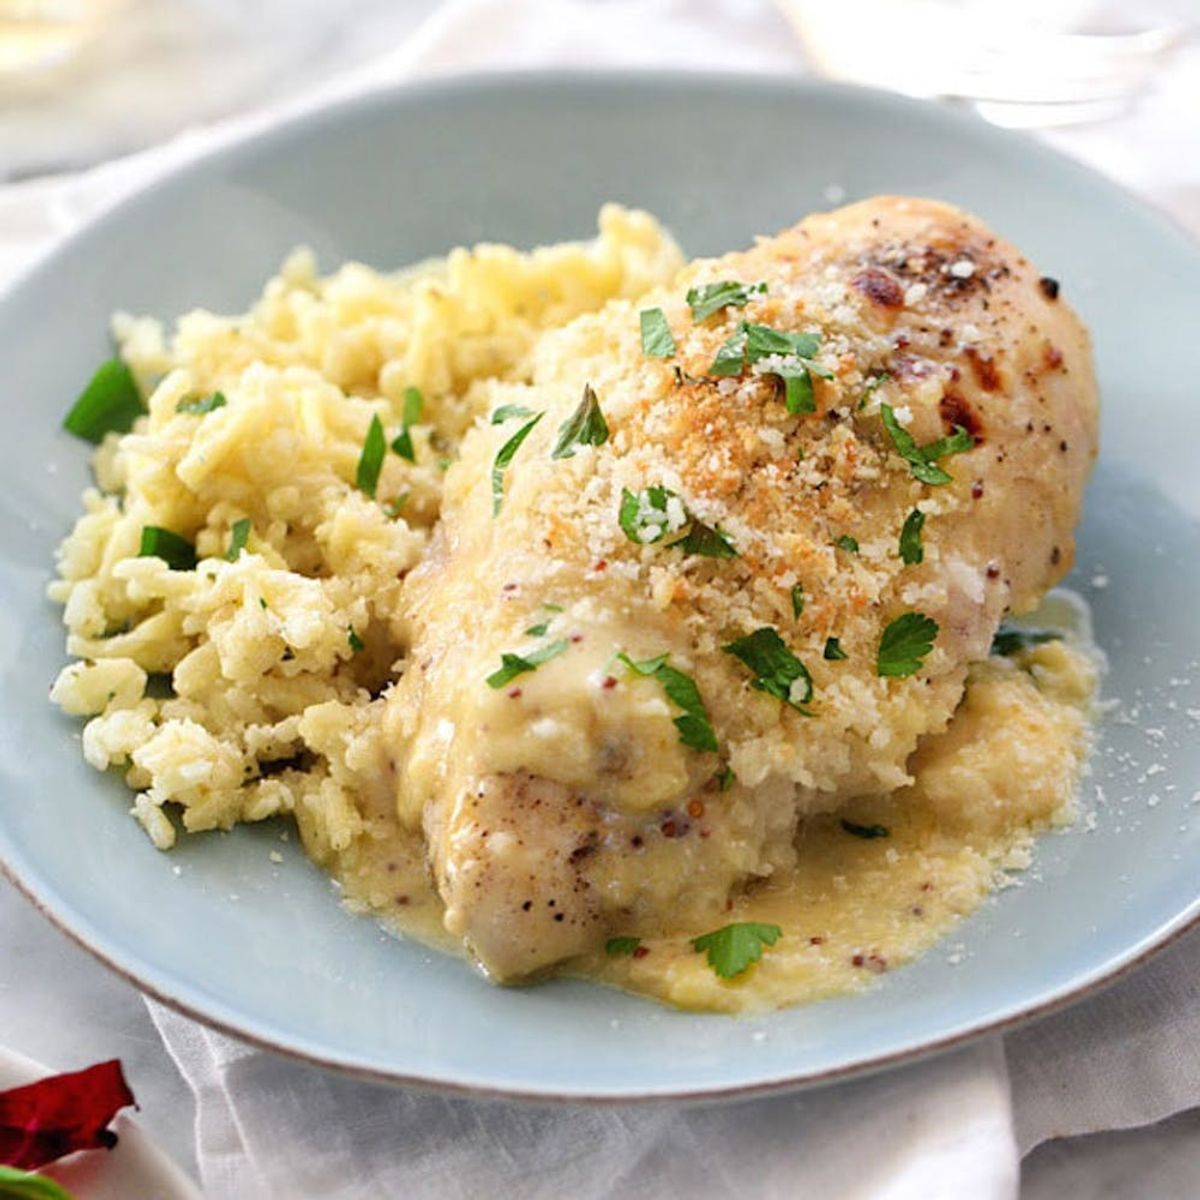 21 Recipes to Spice Up Boring Baked Chicken Breast